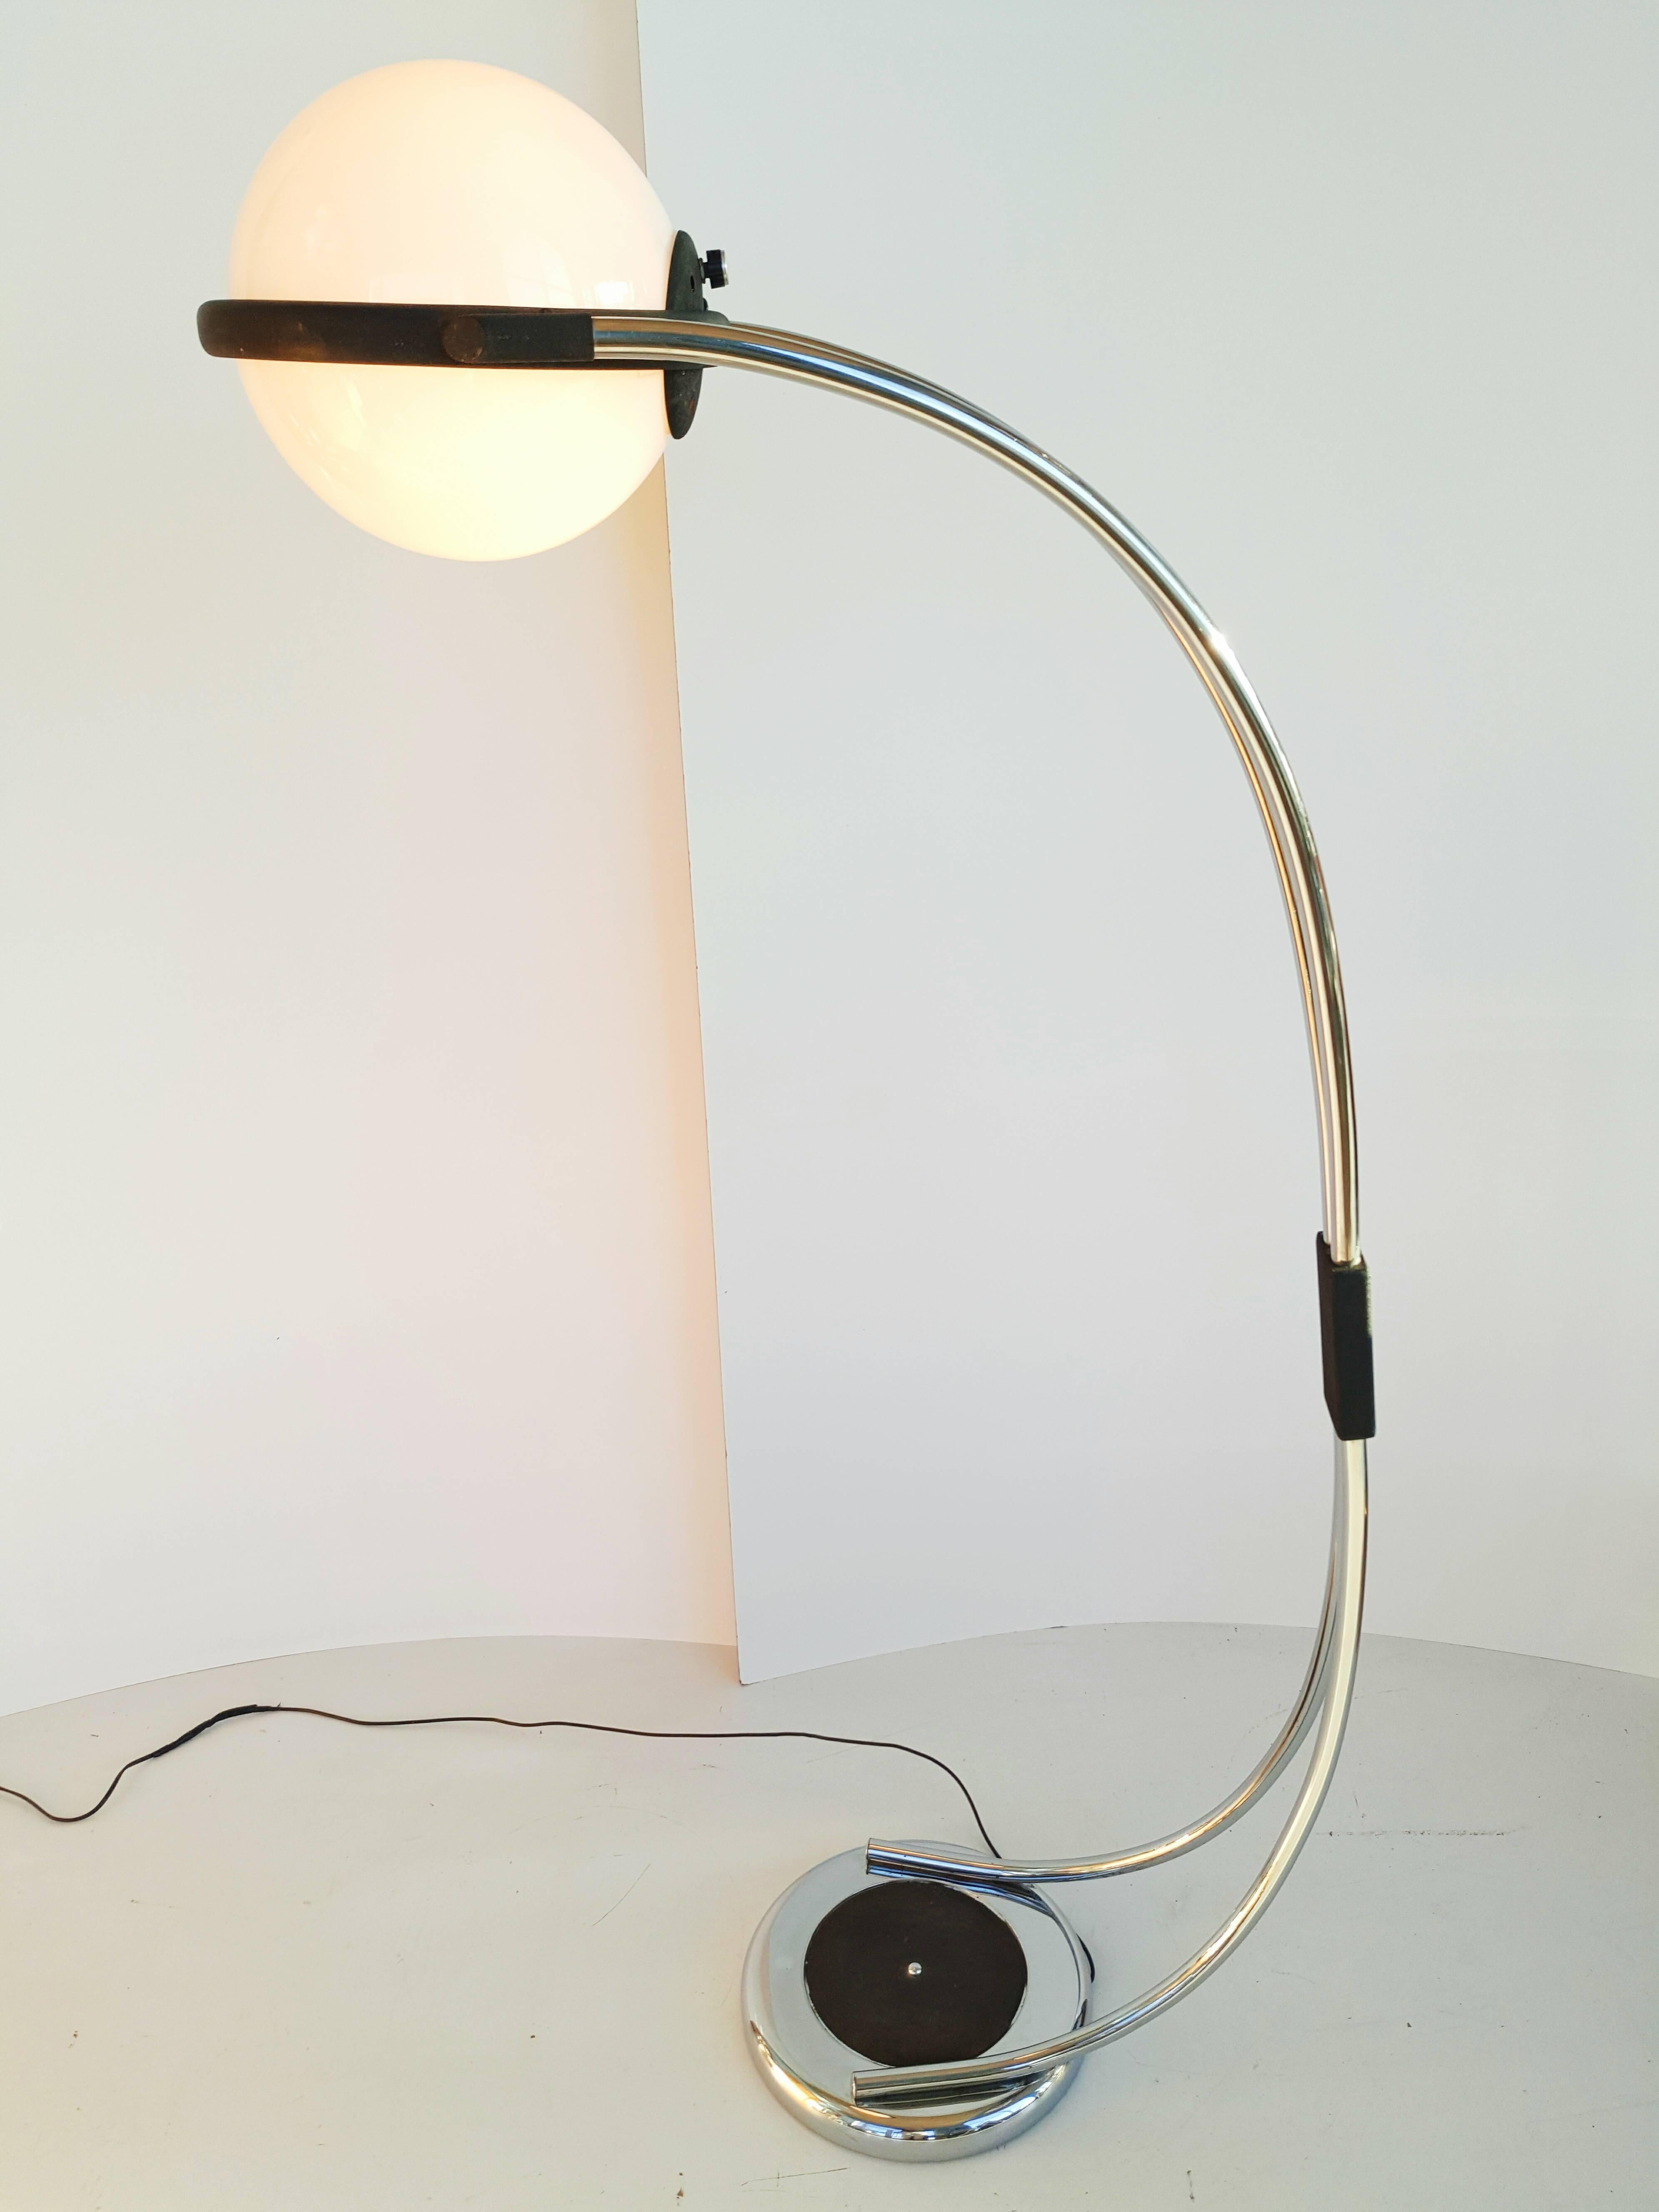 Beautiful and rare large Italian arc floor lamp manufactured in 1970, chrome and opaline glass, with two bulbs, one normal the other with an intensity dimmer. In perfect vintage condition.